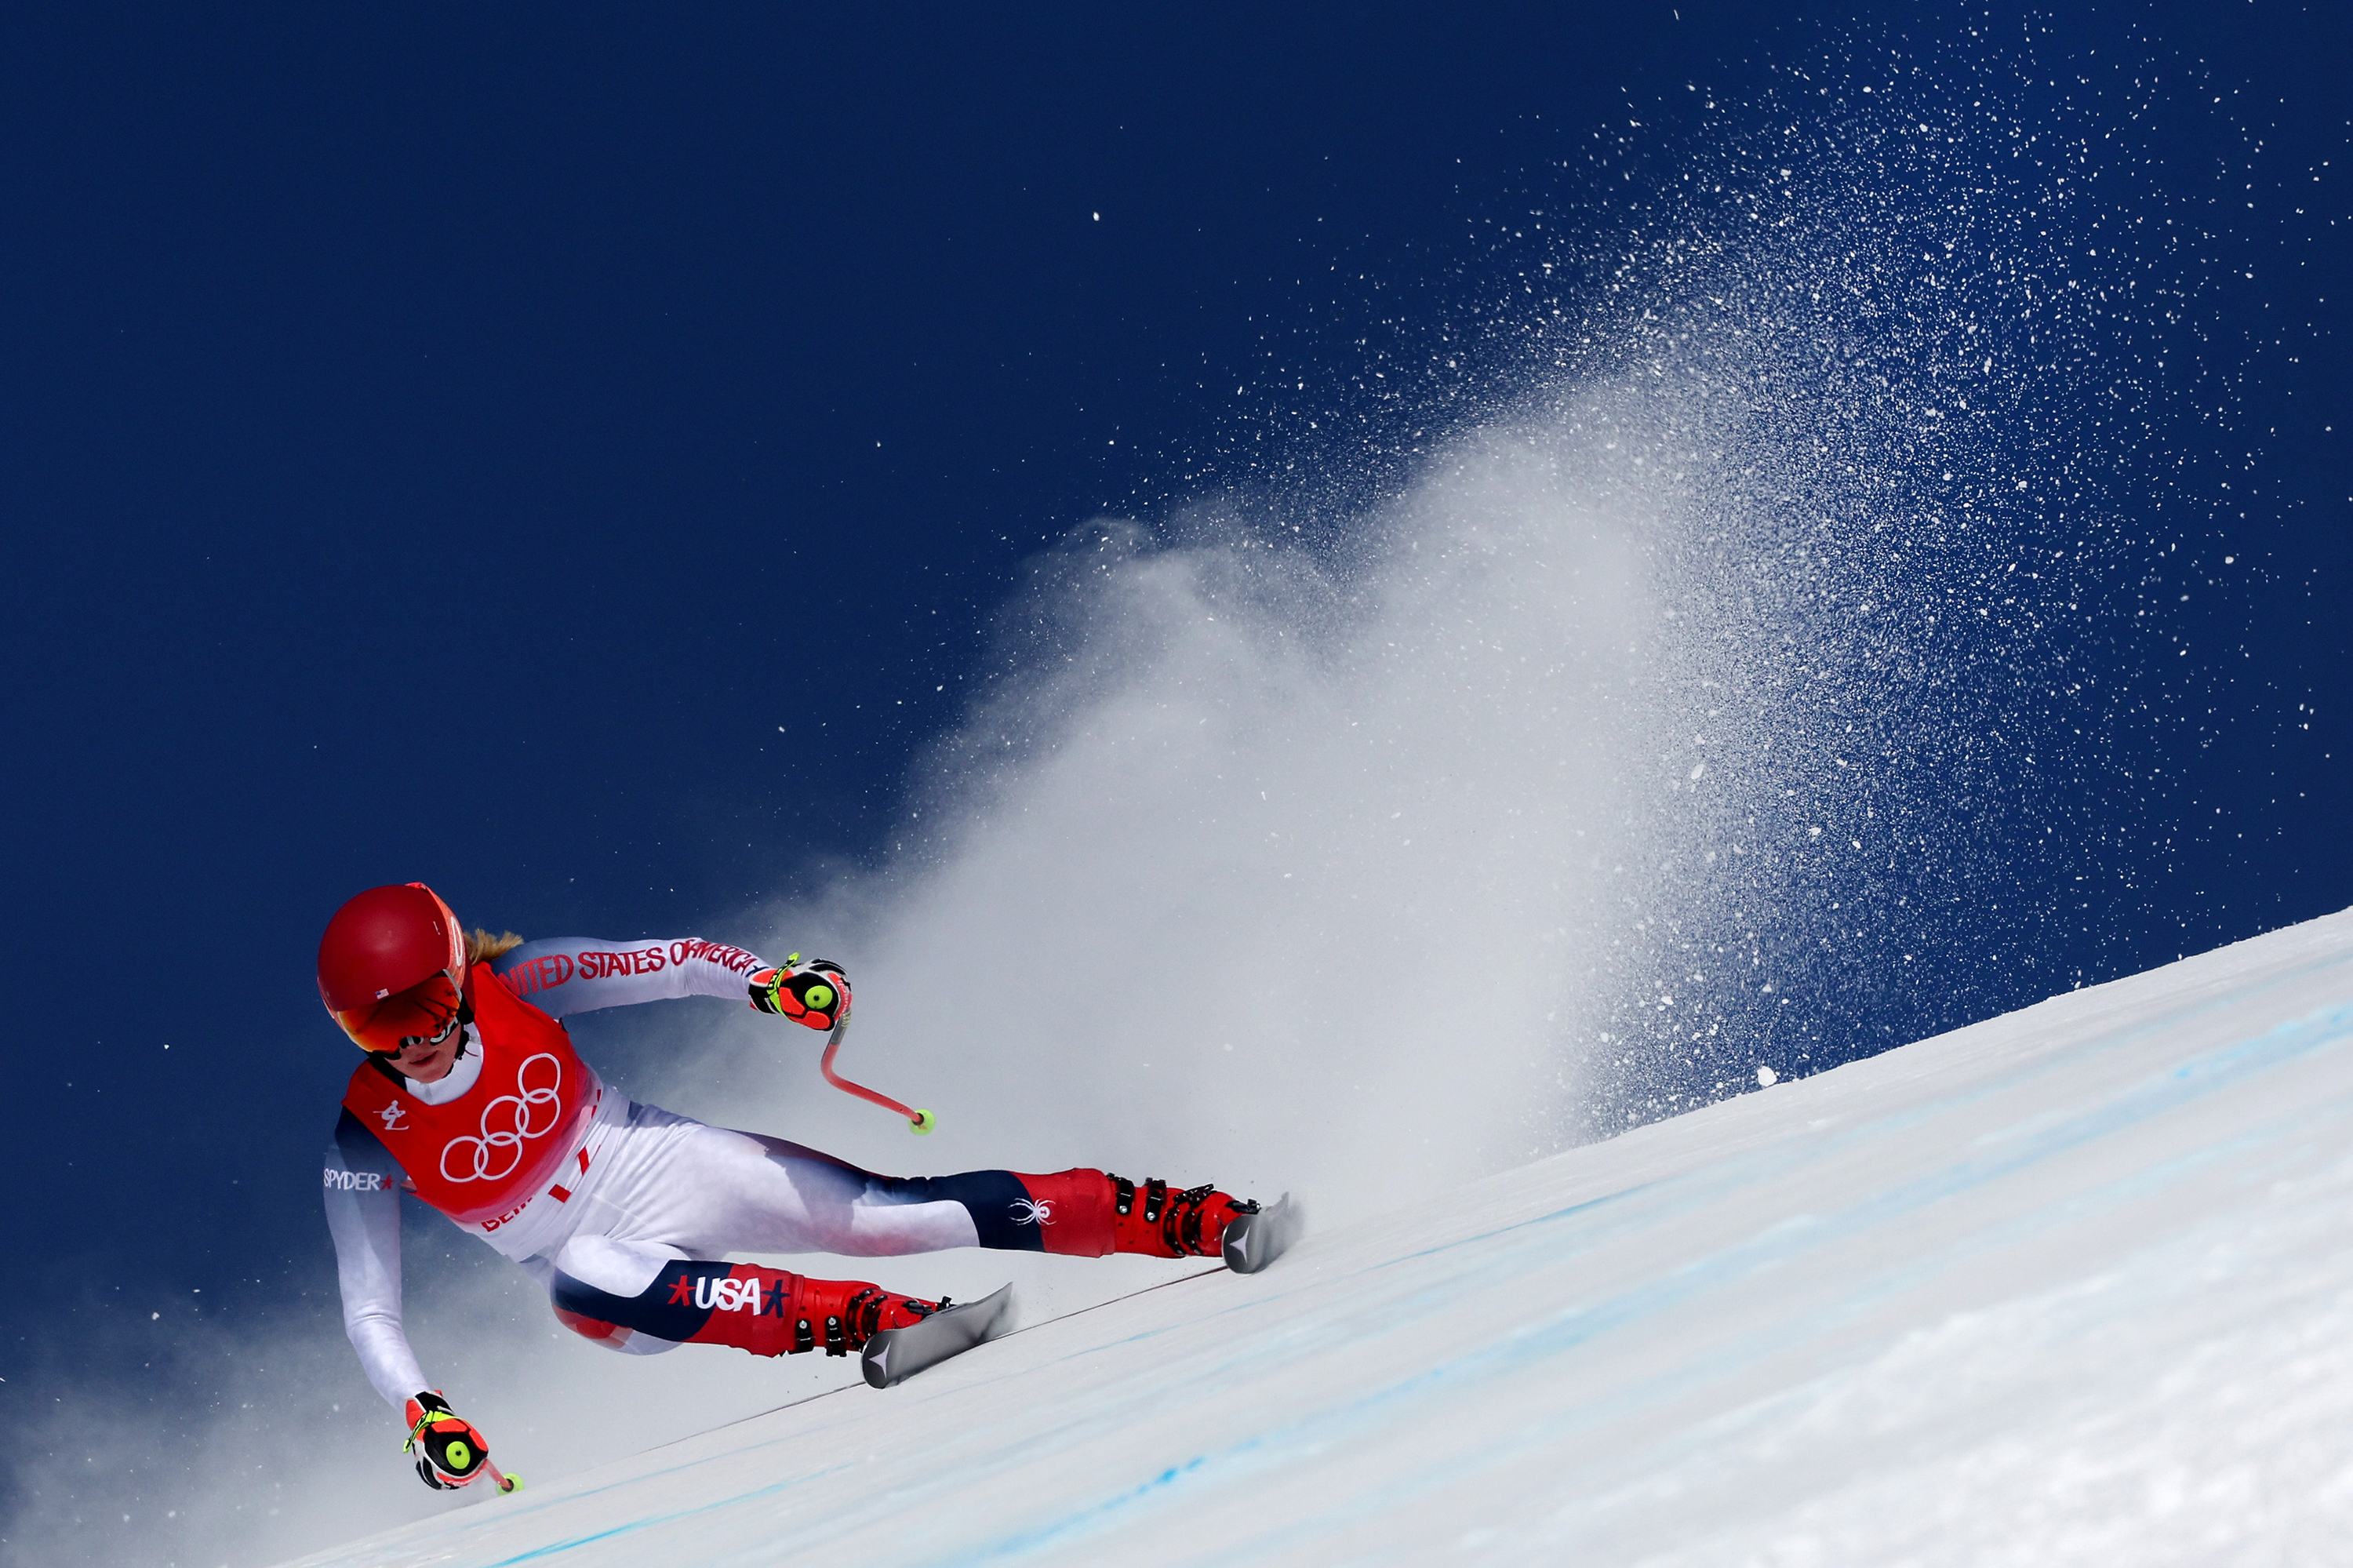 Team USA's Mikaela Shiffrin skis during the women's downhill on Tuesday.